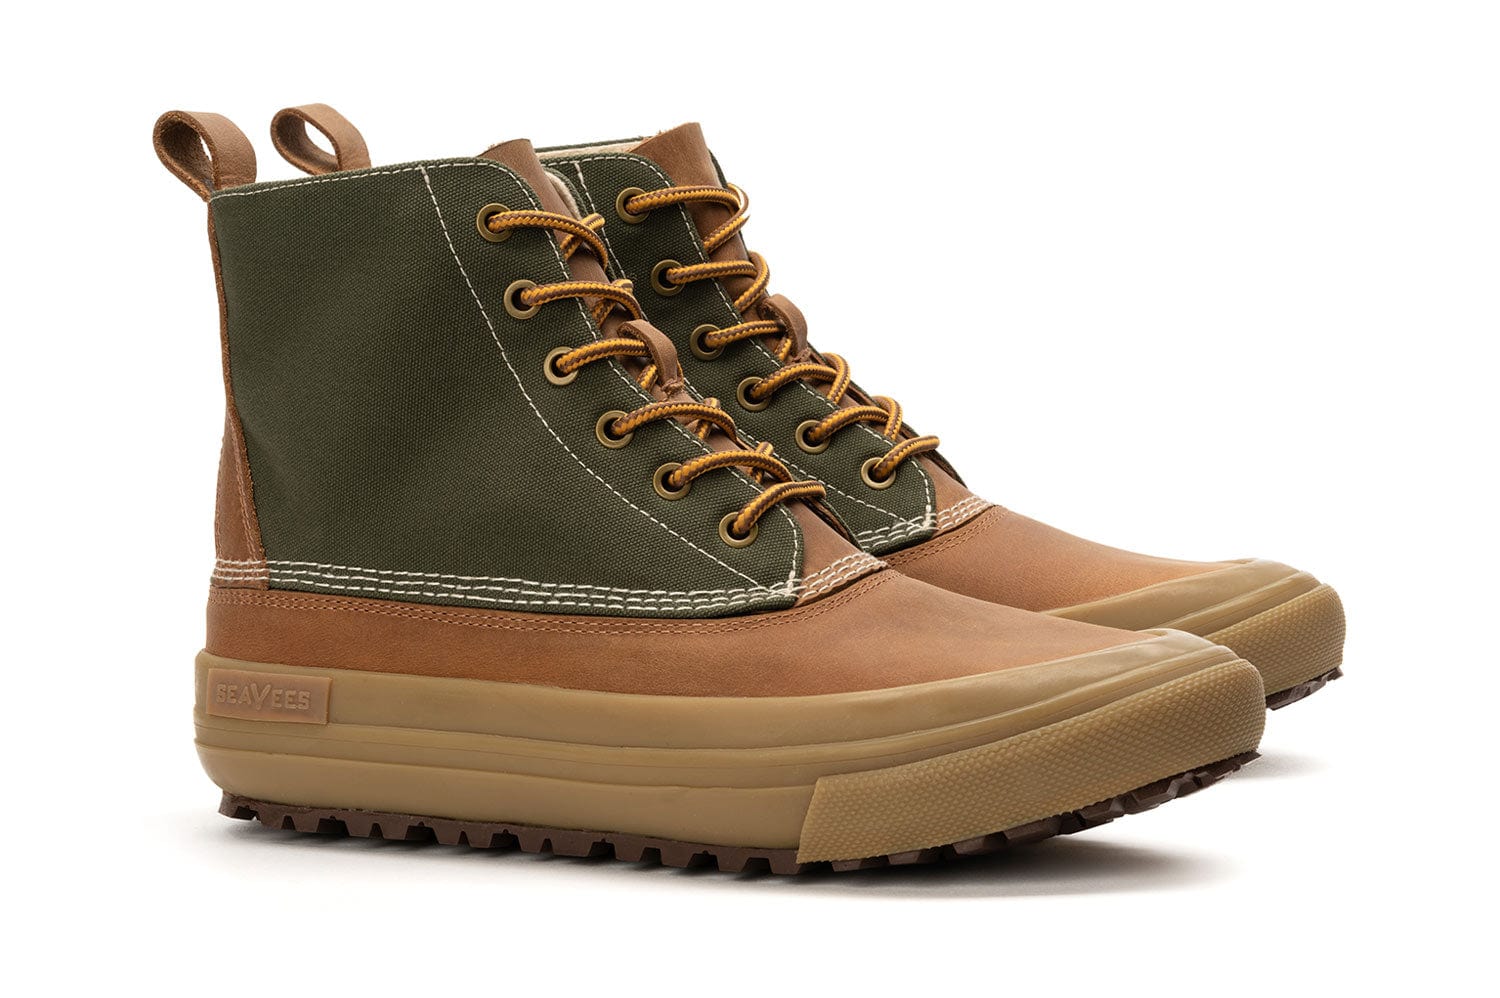 Cascade Range boot in Cashew/Olive featuring front lacing with brass eyelets and two-tone design, set against a plain backdrop.